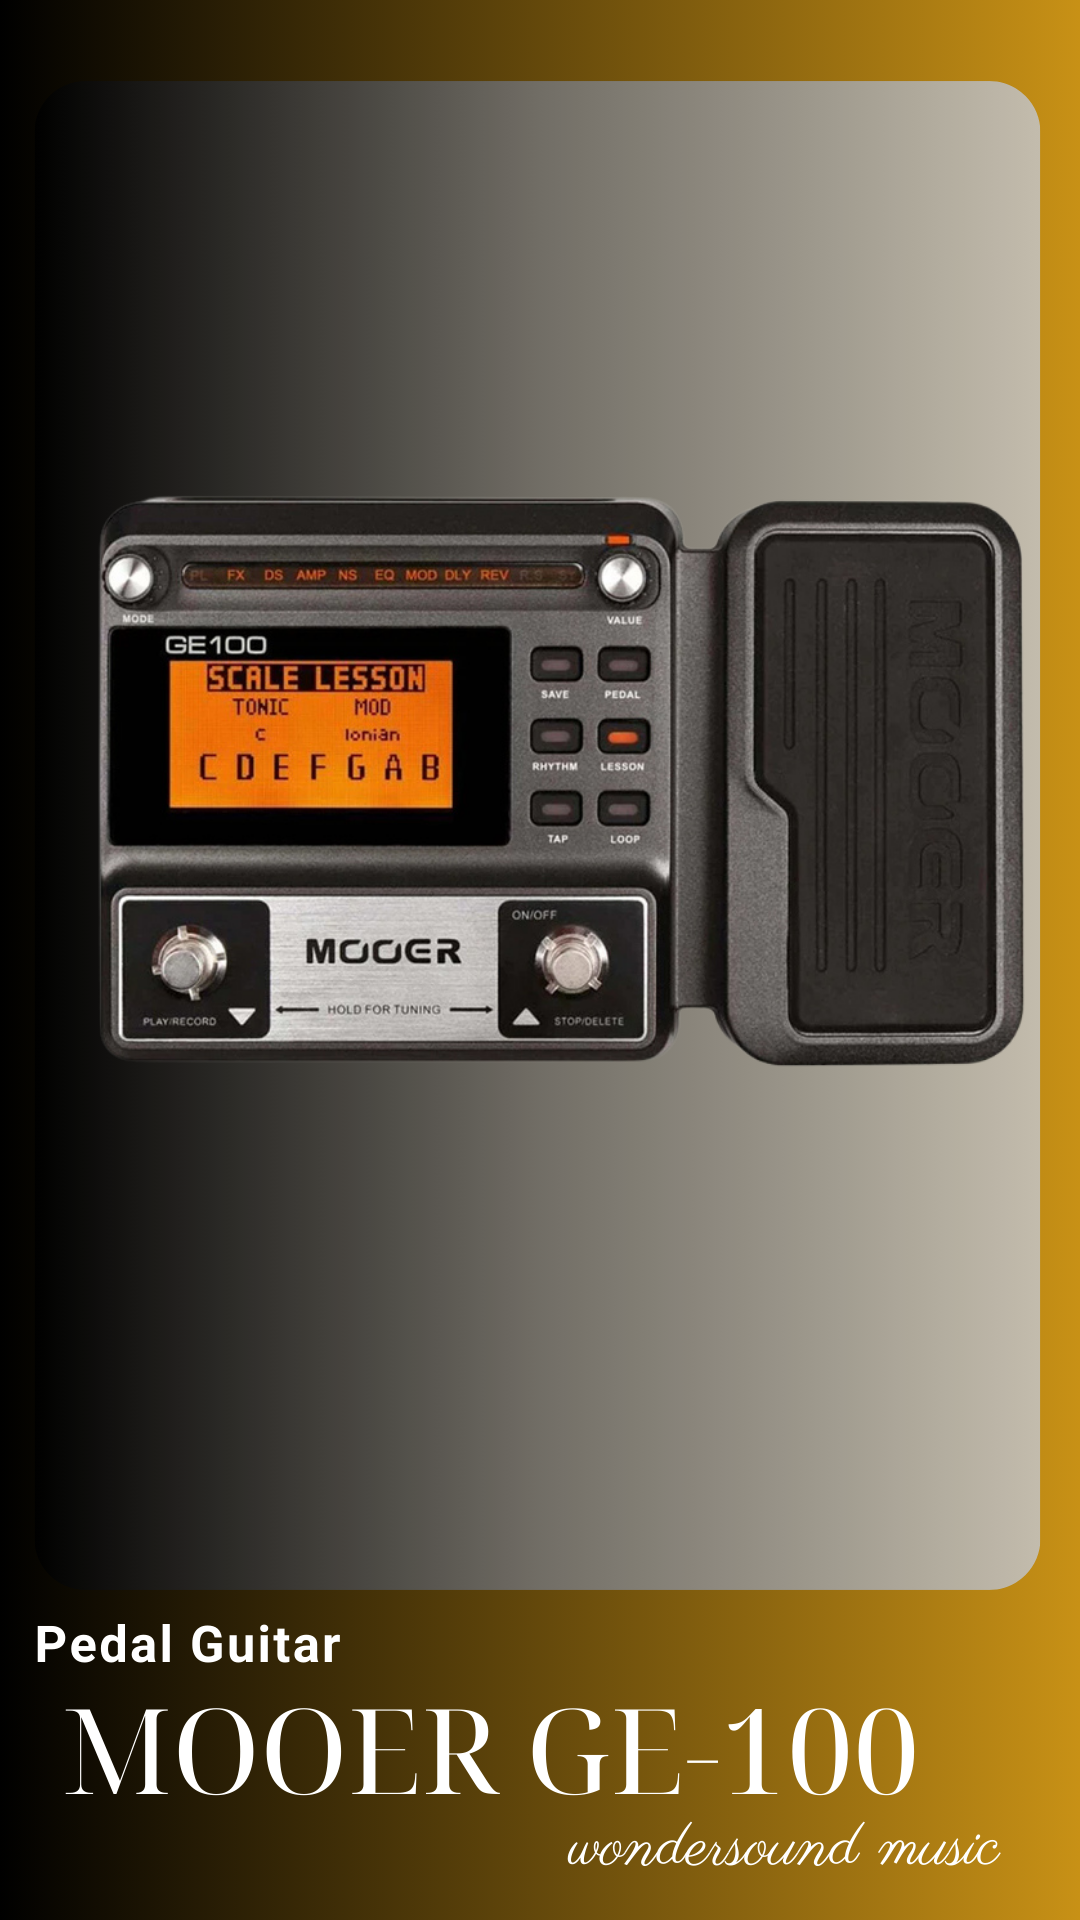  PEDAL GUITAR ELECTRIC (Multi Effects) MOOER GE-100 